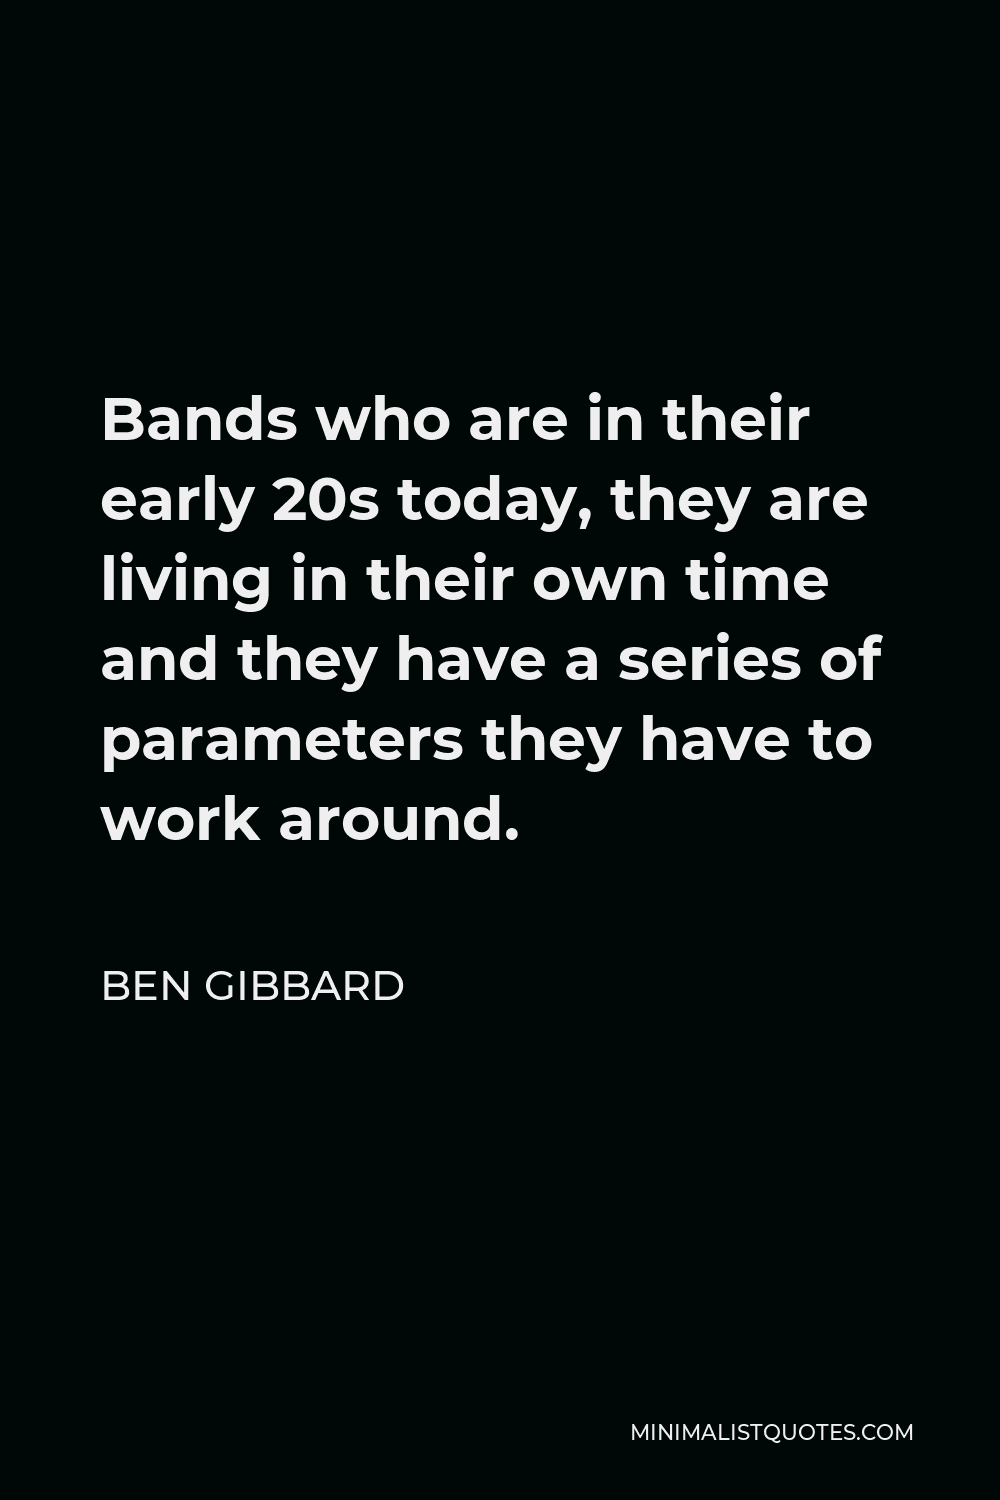 Ben Gibbard Quote - Bands who are in their early 20s today, they are living in their own time and they have a series of parameters they have to work around.